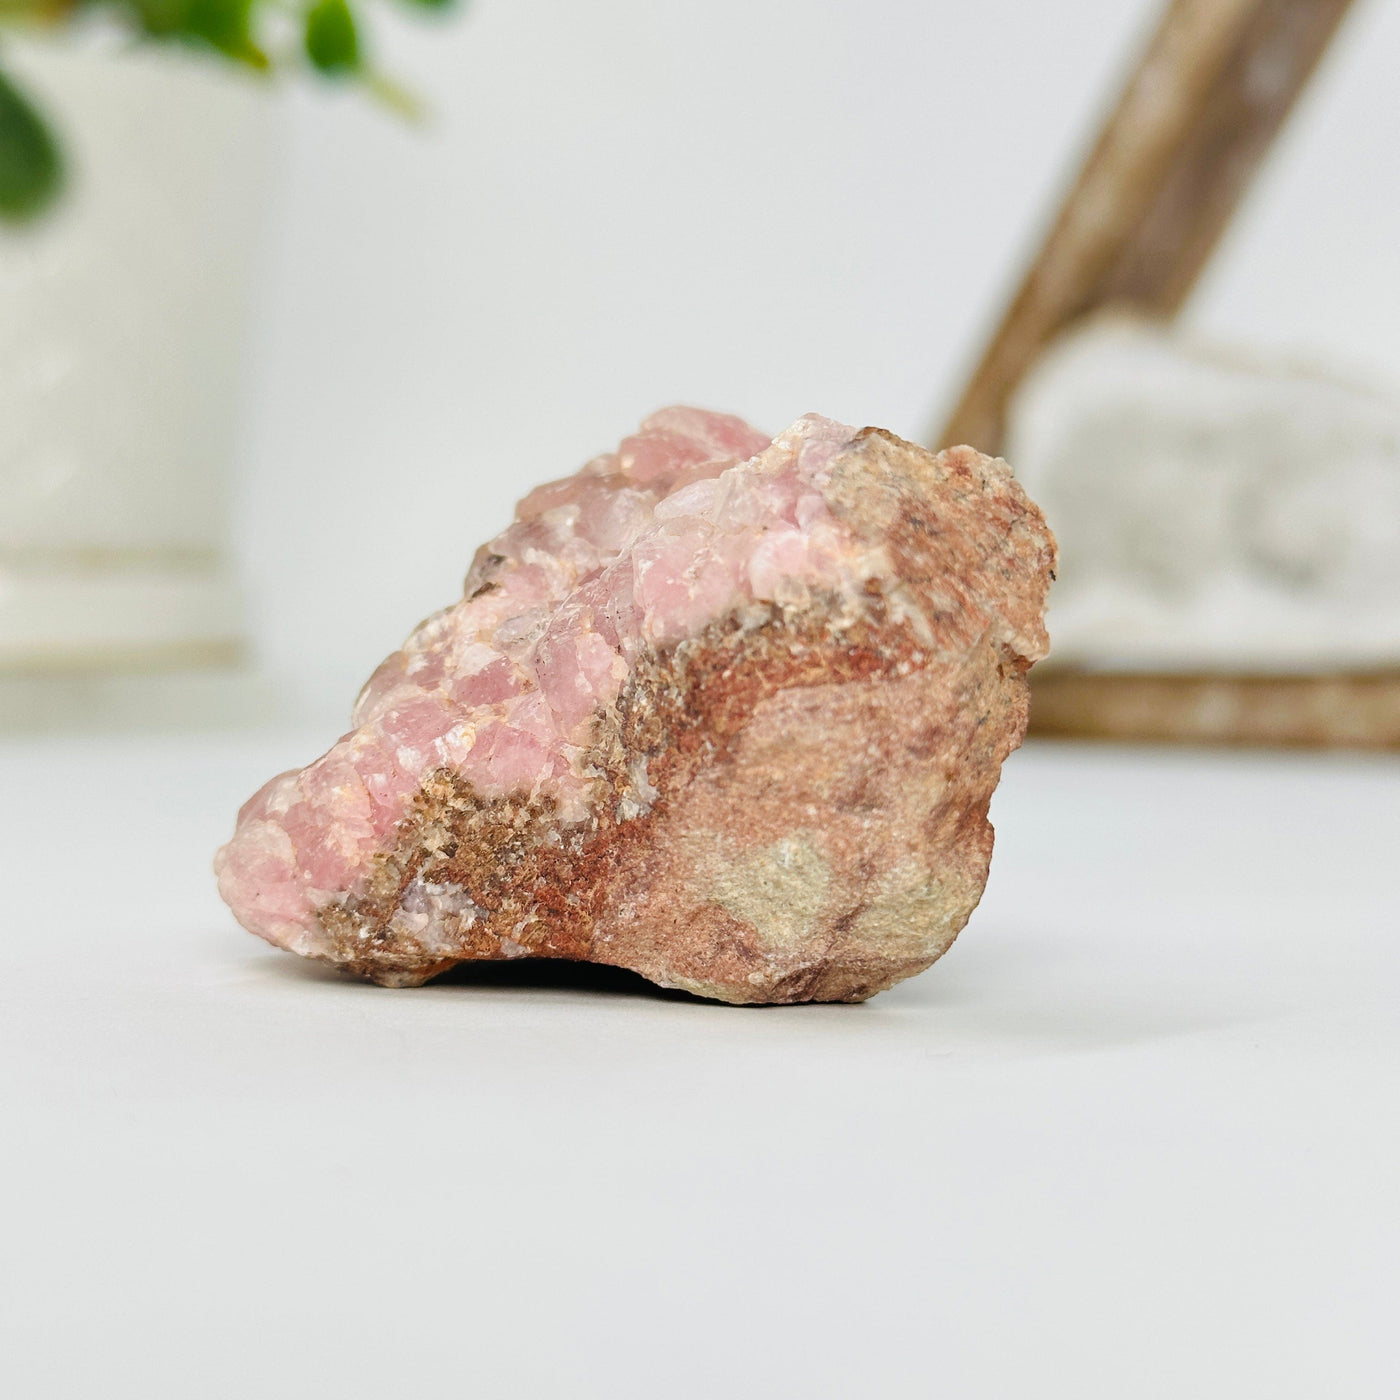 pink cobalto calcite formation with decorations in the background